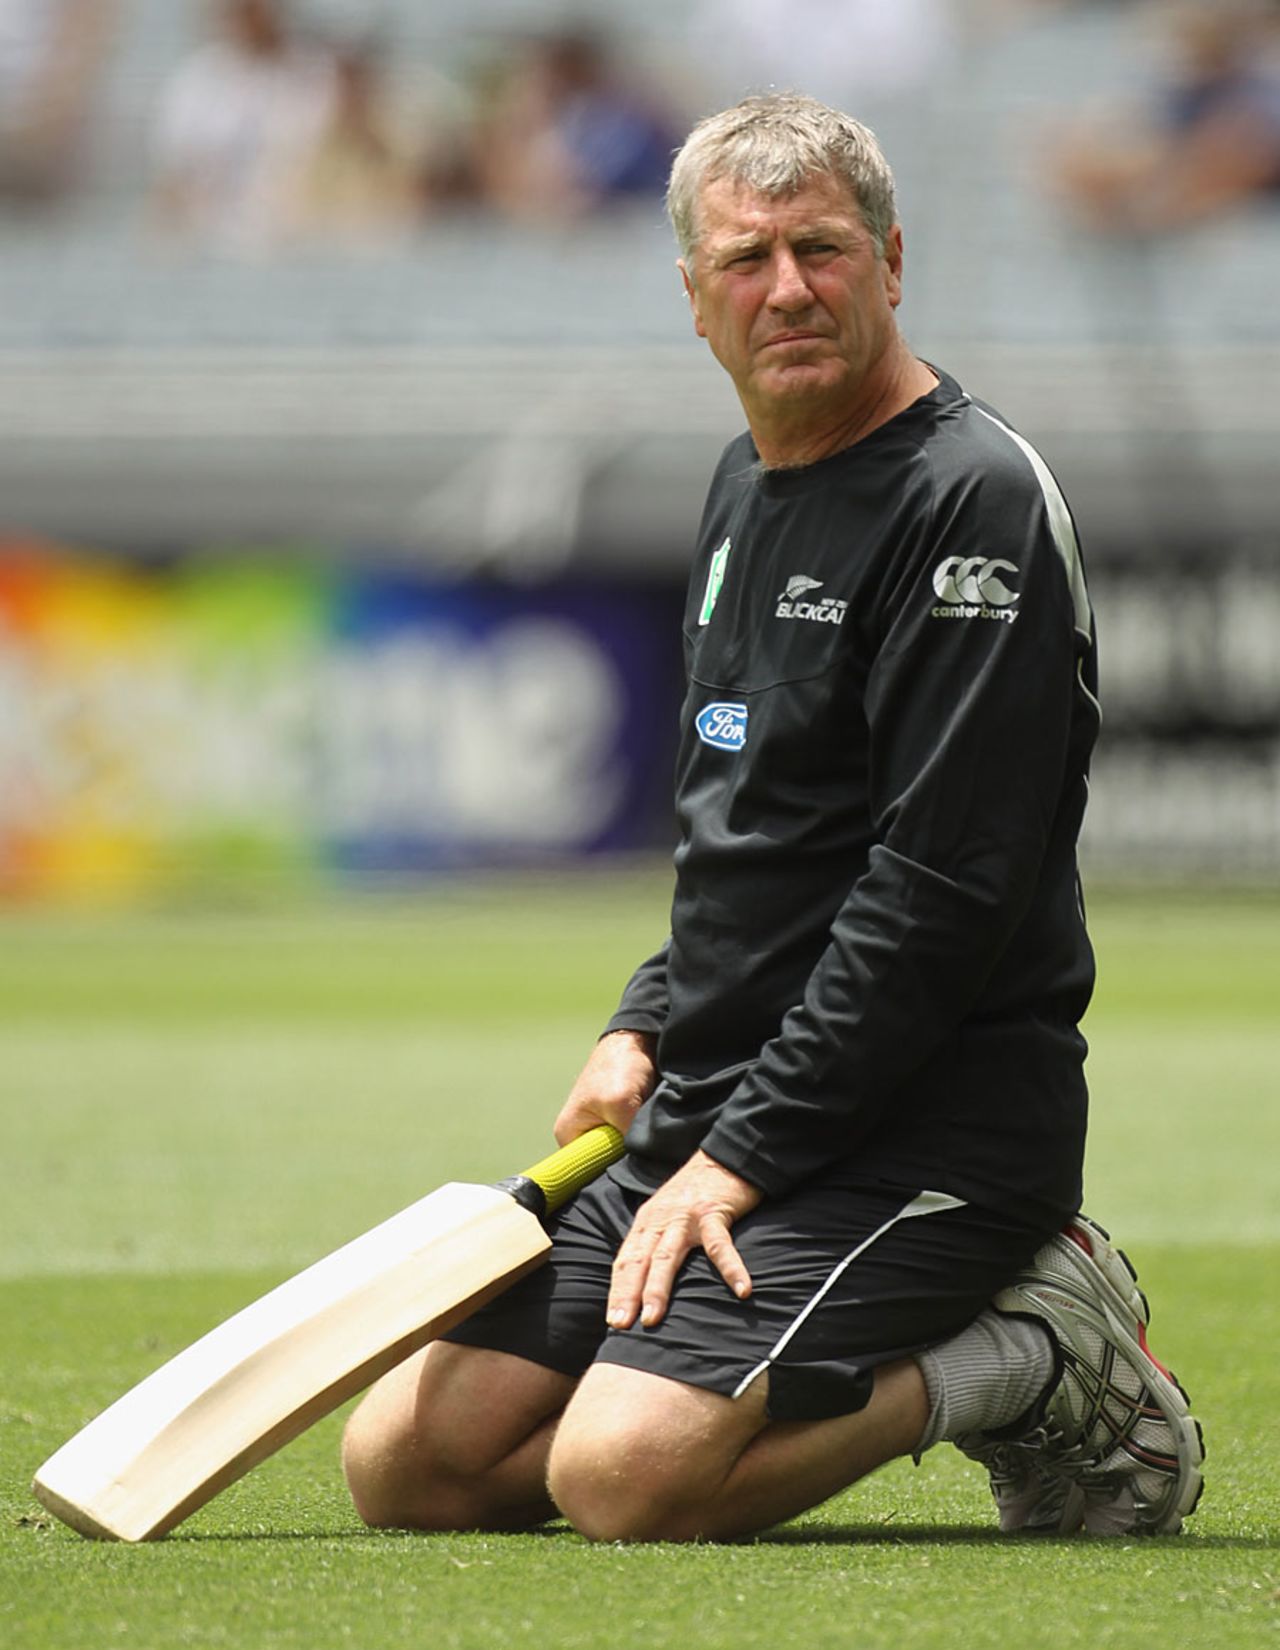 John Wright will be relieved after his first game as New Zealand coach, New Zealand v Pakistan, 1st Twenty20, Auckland, December 26, 2010